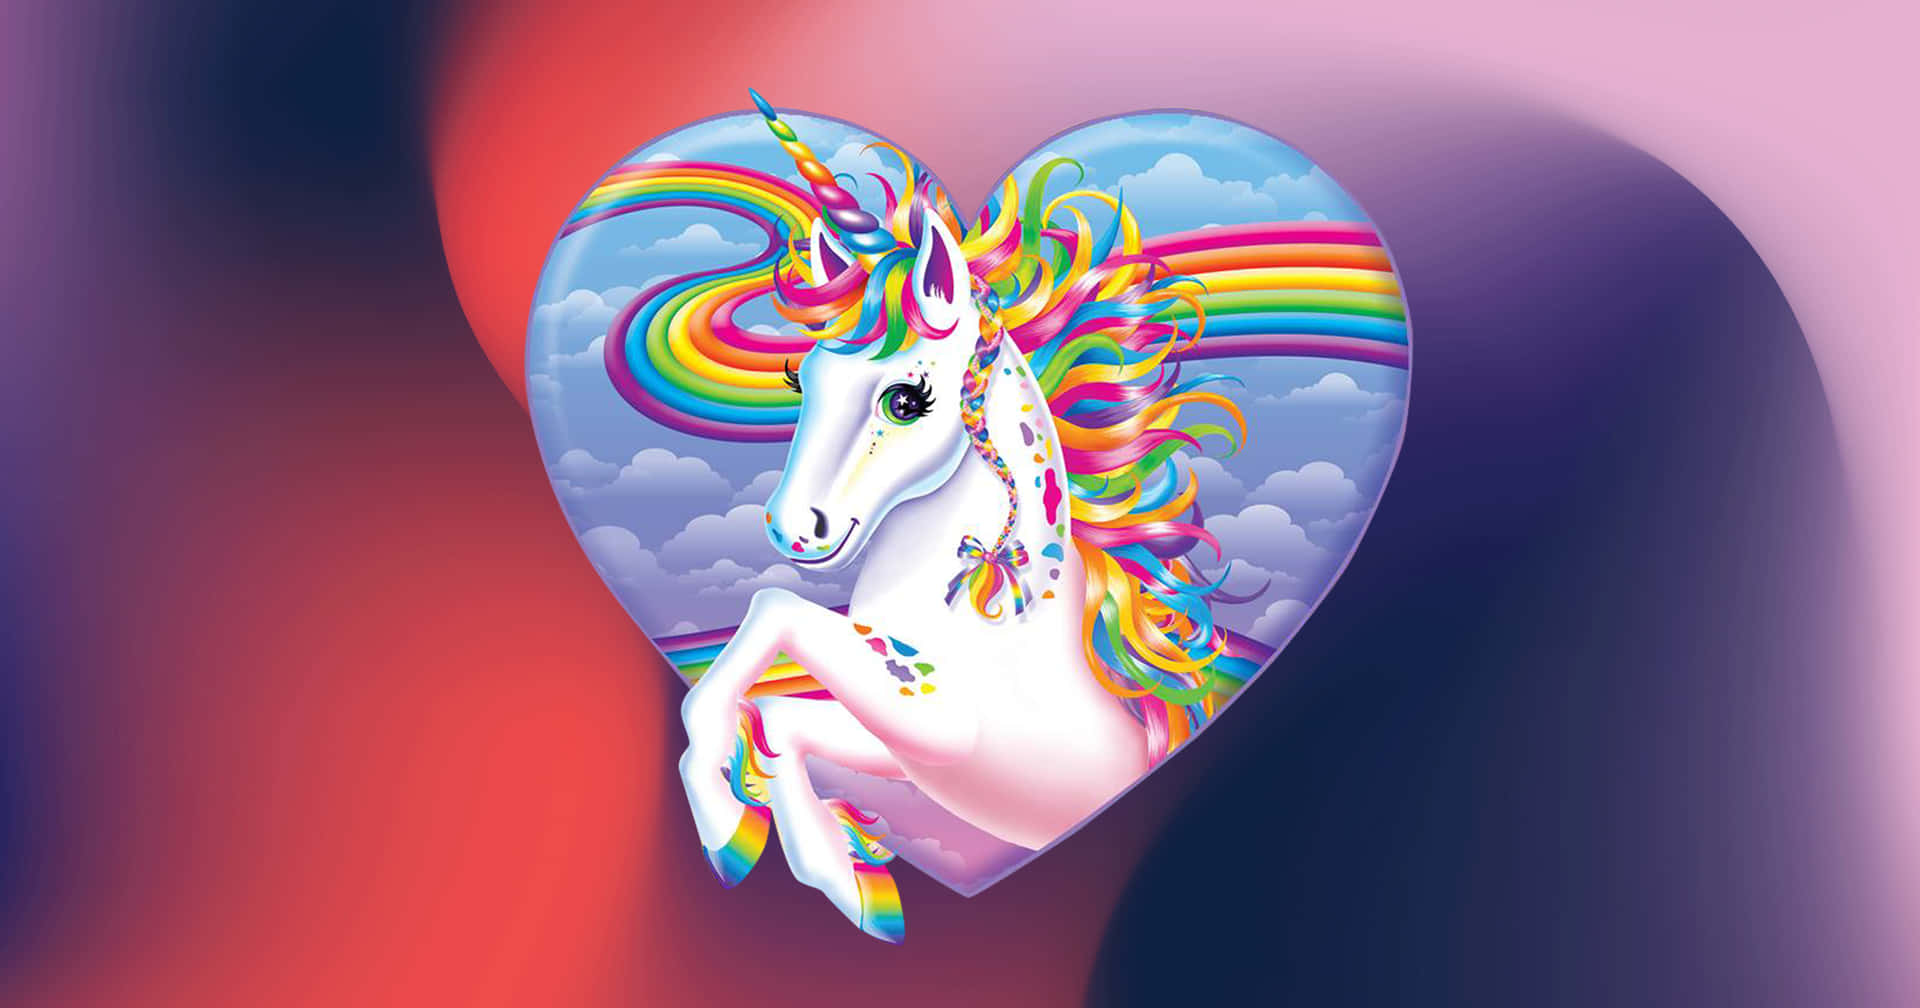 Celebrate Your Magical Side with the Colorful Lisa Frank Unicorn Wallpaper